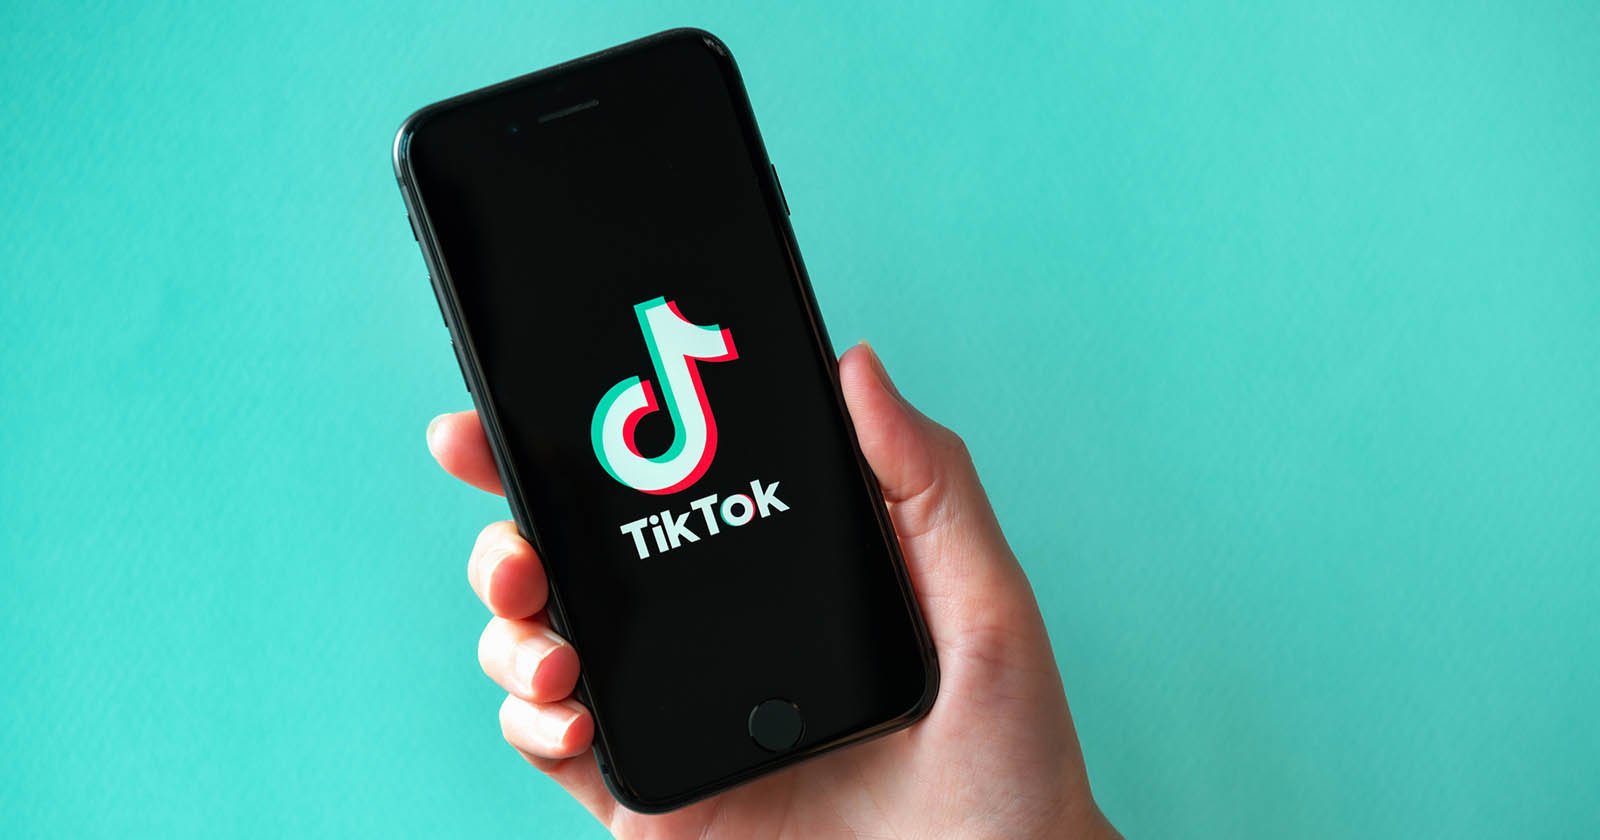 Senate Passes Bill That Would Ban TikTok on Government Devices